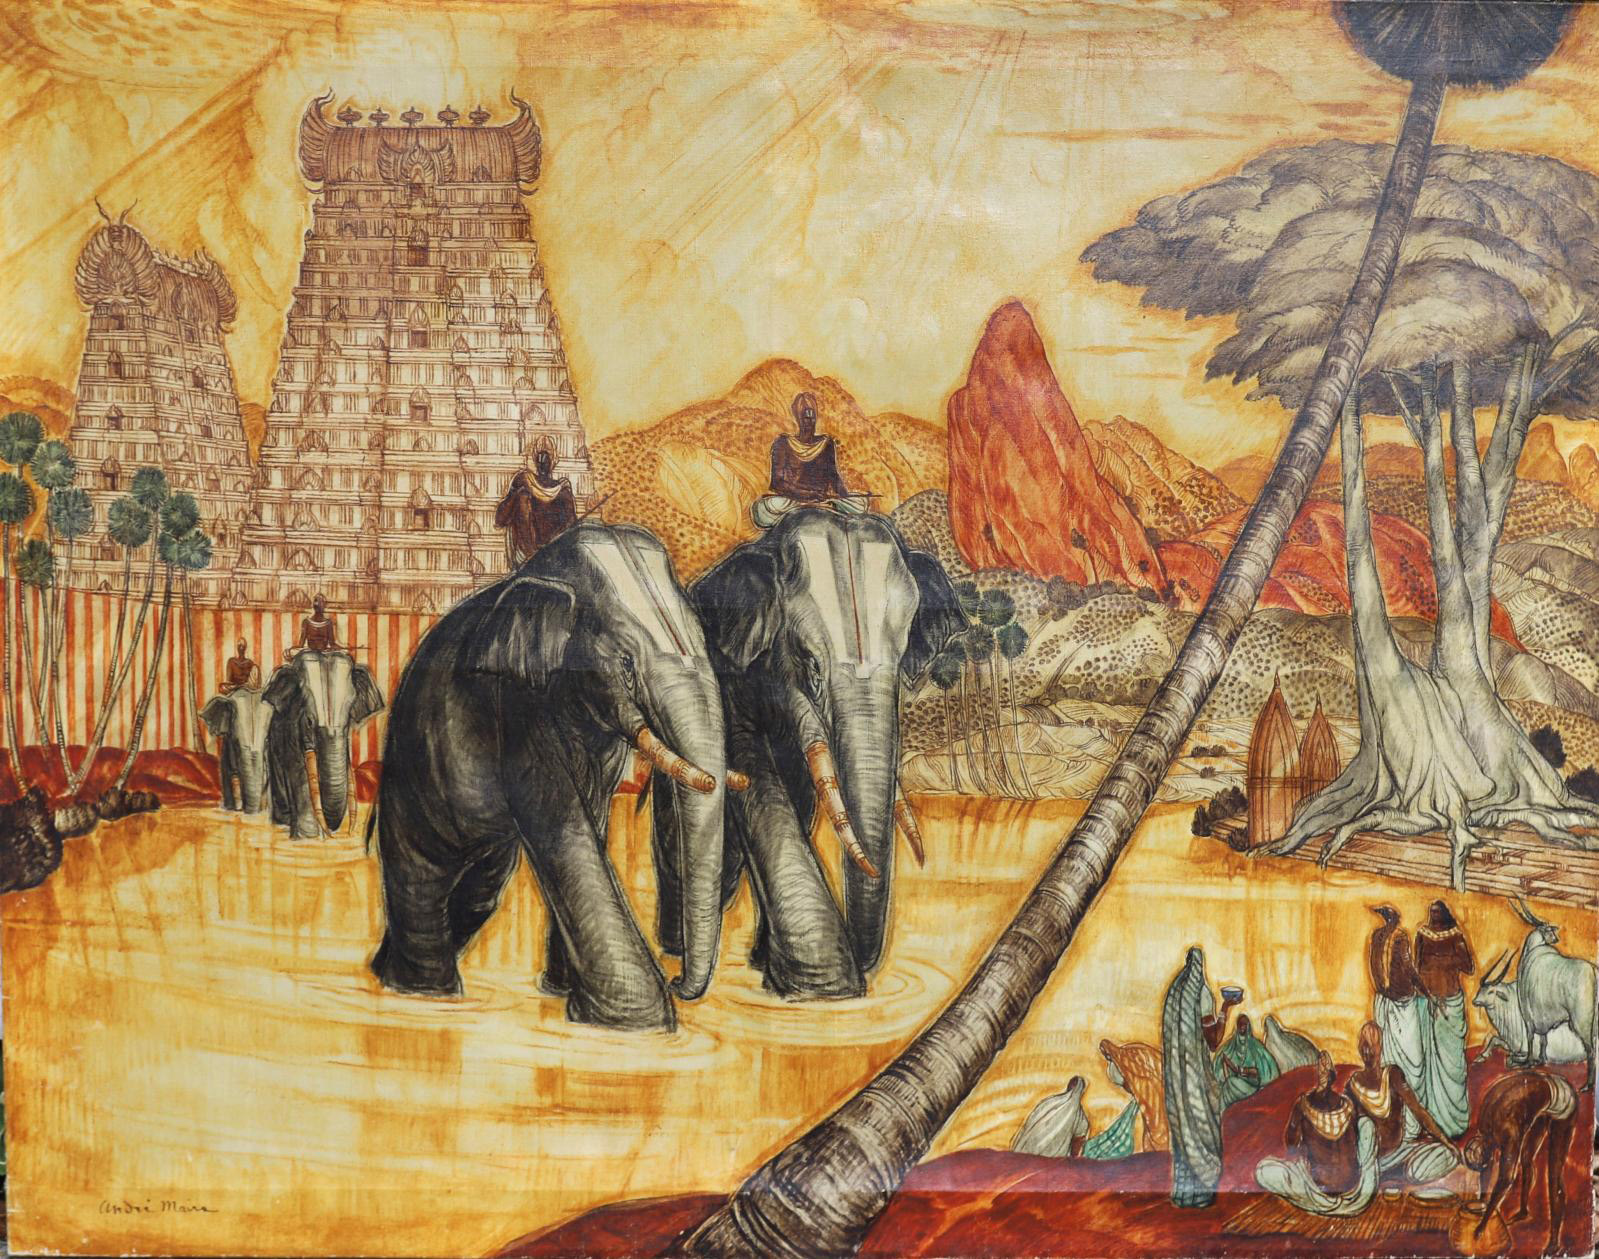 André Maire: The Road to Madurai